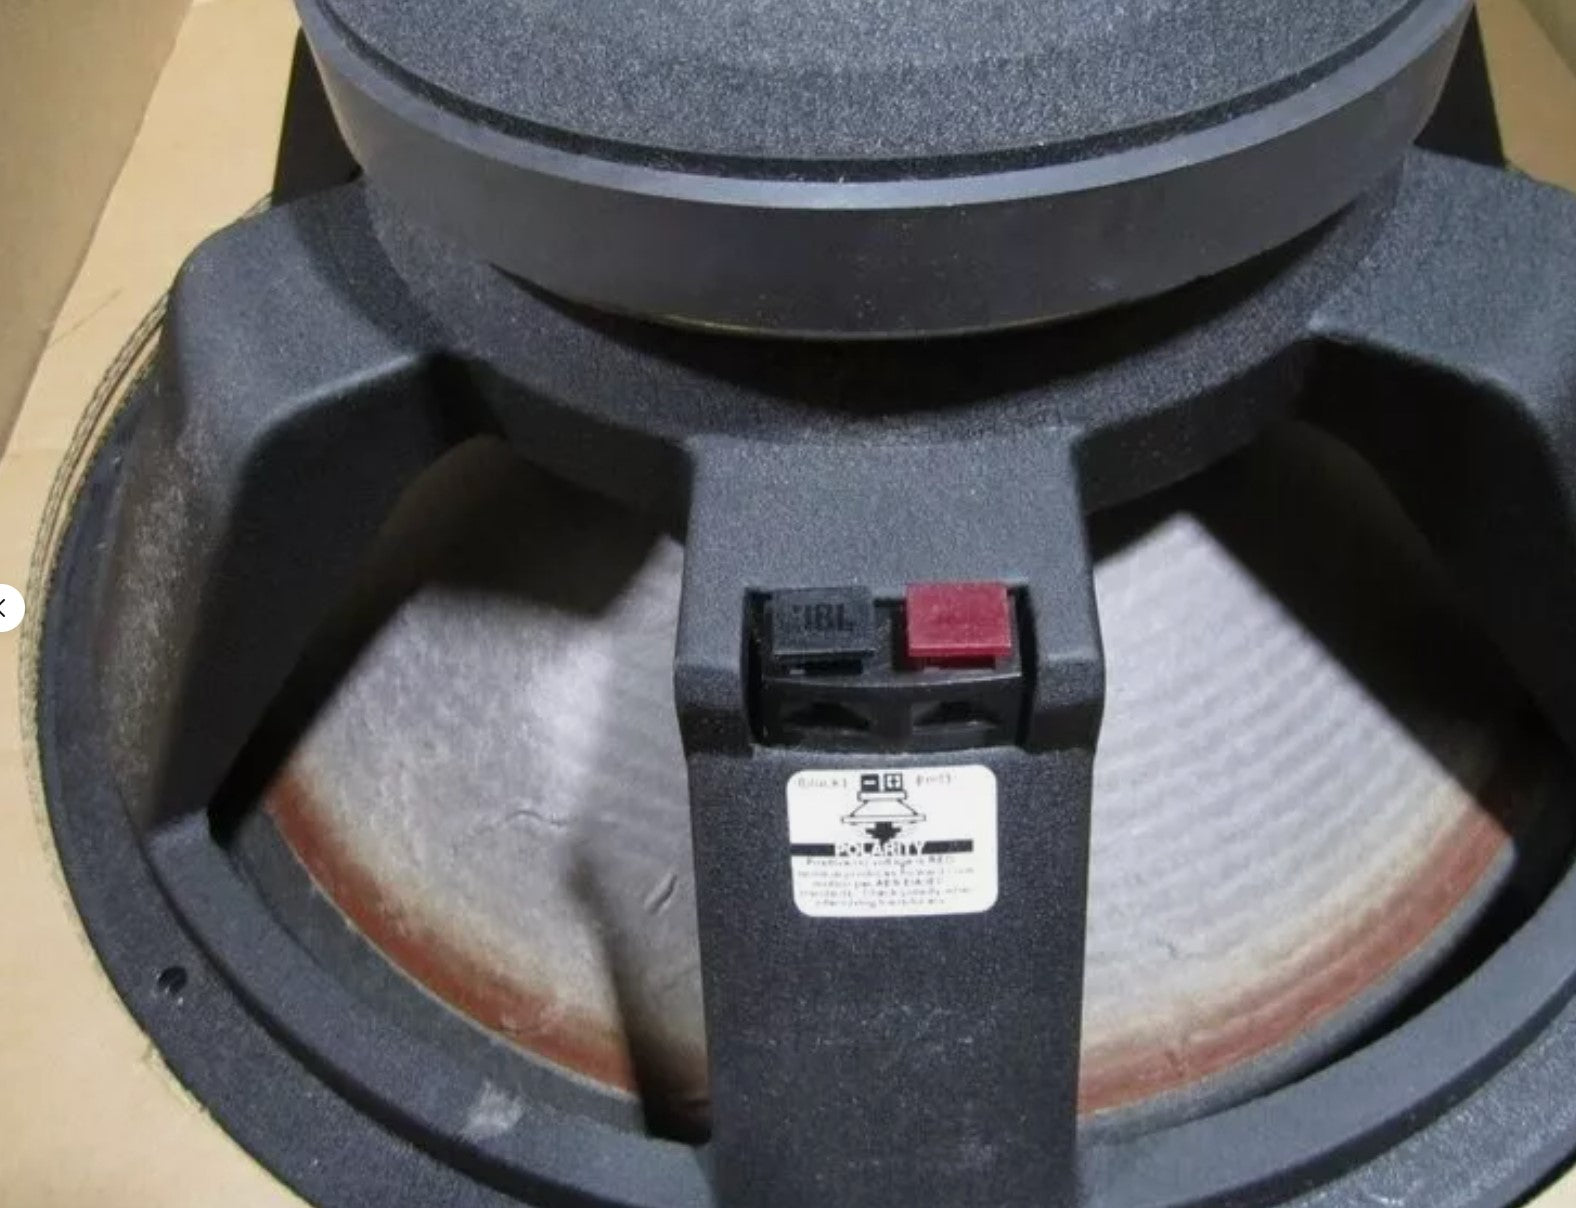 Used JBL 2242HPL 18" Low Frequency Transducer, 8 ohm for Sale. We Sell Professional Audio Equipment. Audio Systems, Amplifiers, Consoles, Mixers, Electronics, Entertainment and Live Sound.